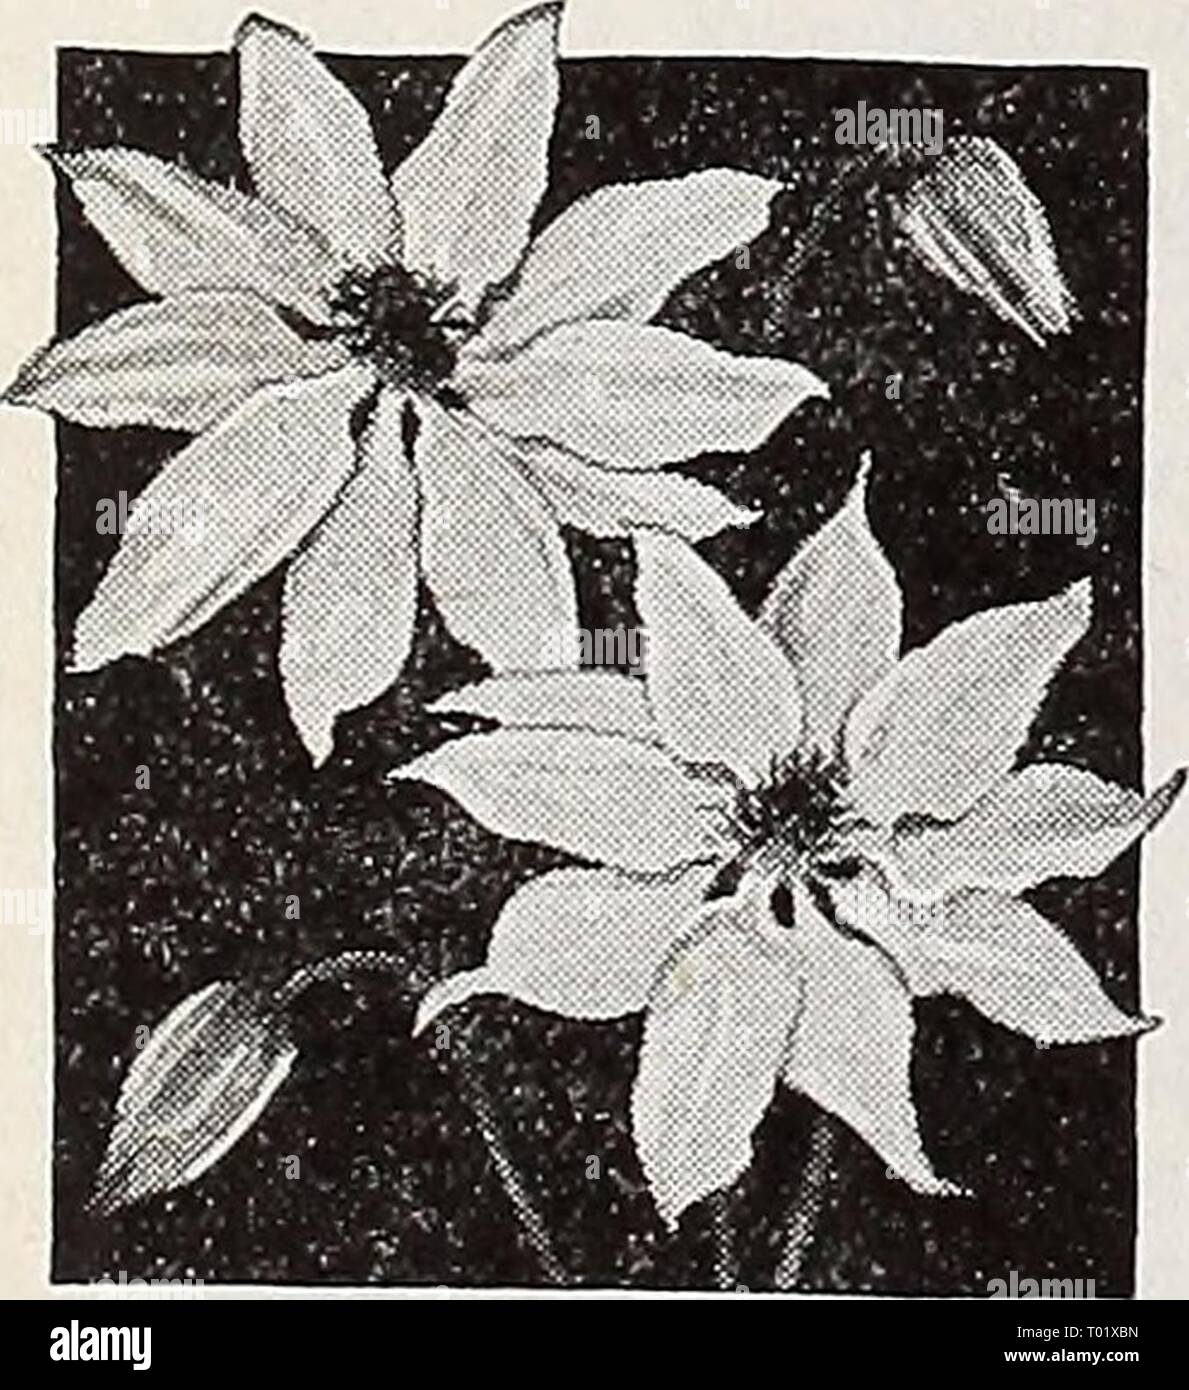 Dreer's hundredth anniversary 1938 specialties and novelties . dreershundredtha1938henr Year: 1938  Ageratum, Dwarf Compact Fairy Pink 1046 Blue Ball Improved {Blue Boy). Of even, compact . growth smothered with flowers of the richest shade of blue. Pkt. 25c; special pkt. 75c. 1052 Dwarf Compact Fairy Pink. An exceptionally dwarf compact variety not more than five inches high, covered with salmon rose-pink blooms. Pkt. 25c; special pkt. 75c. Two Beautiful New Aquilegia—Columbine |hp] ® 1210 Clematiflora. This glori- ous new Columbine is entirely distinct, having flowers which greatly resemble  Stock Photo